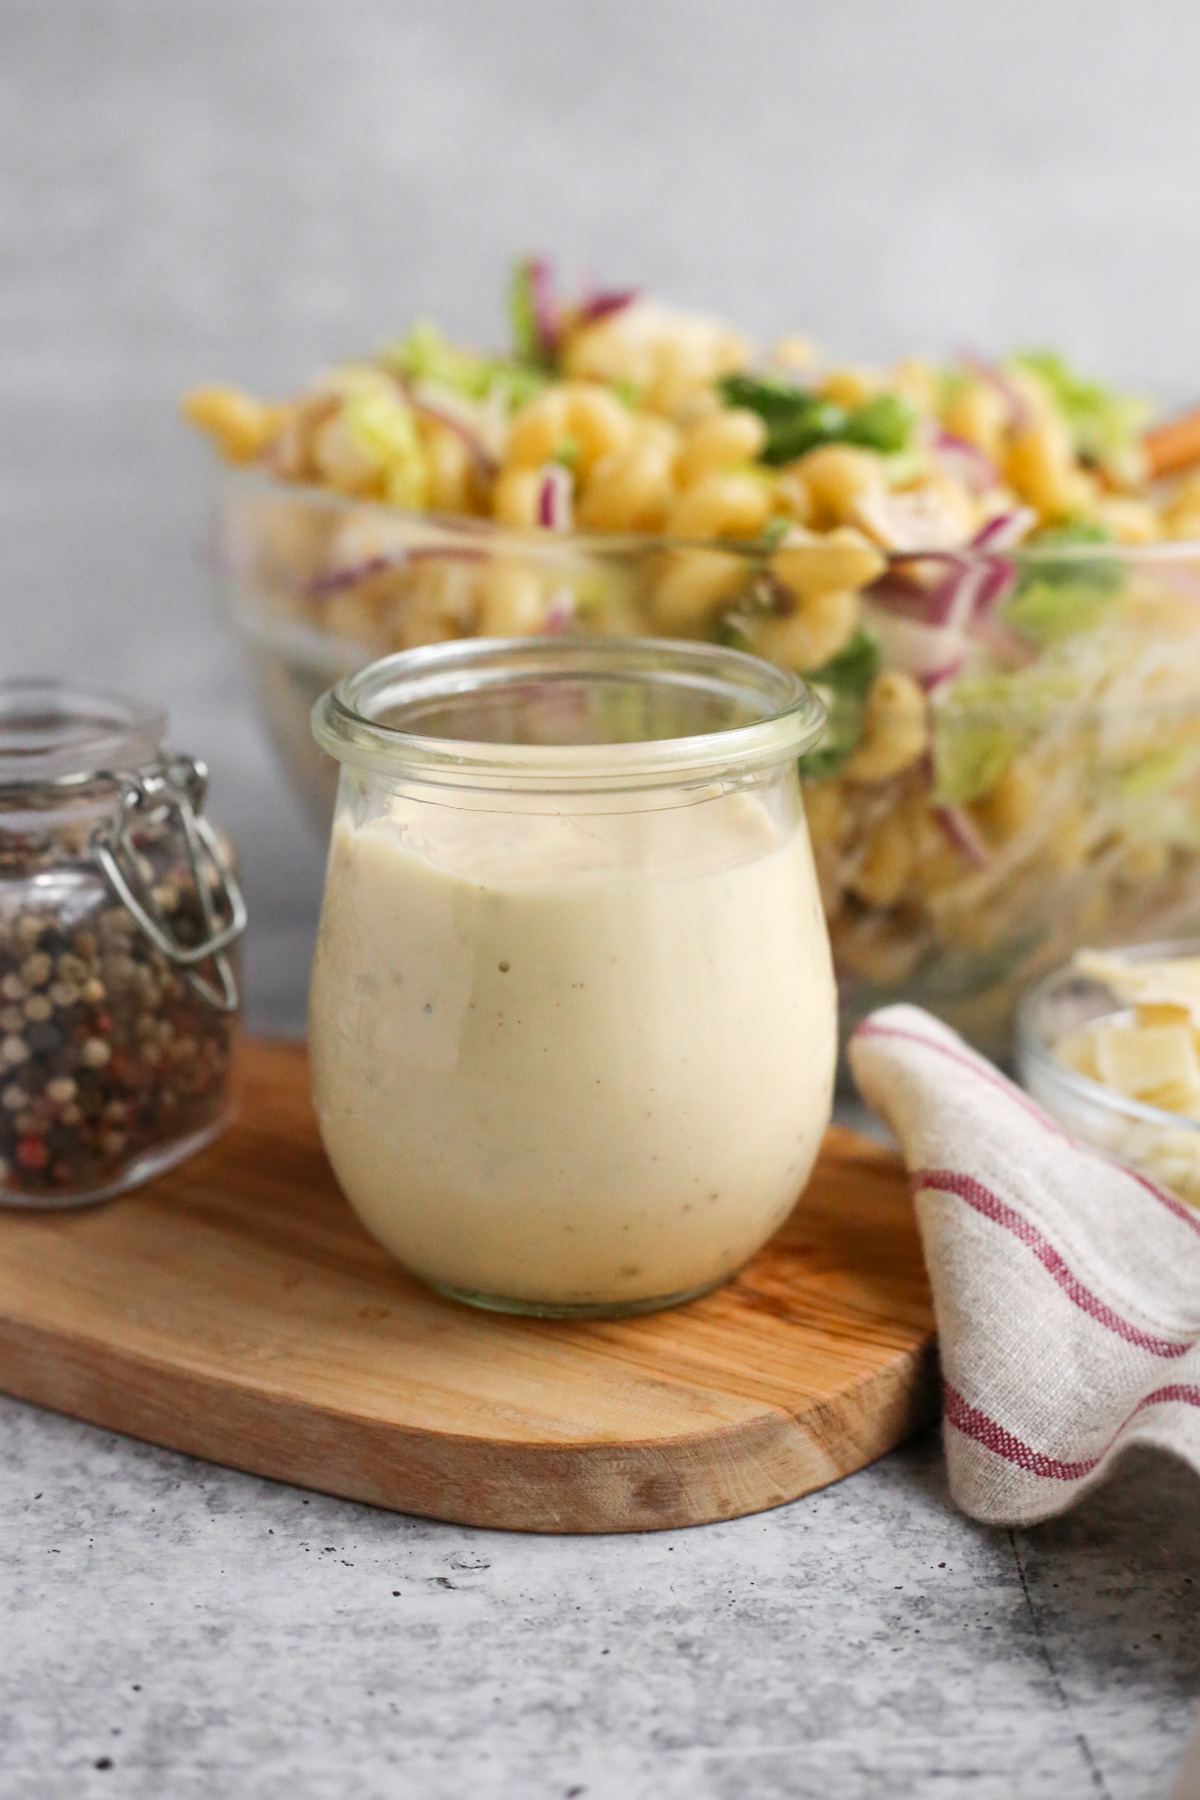 A clear glass jar full of creamy Caesar Salad dressing displayed on a small wooden serving platter. In the background, additional ingredients and a serving bowl full of a creamy pasta salad is visible